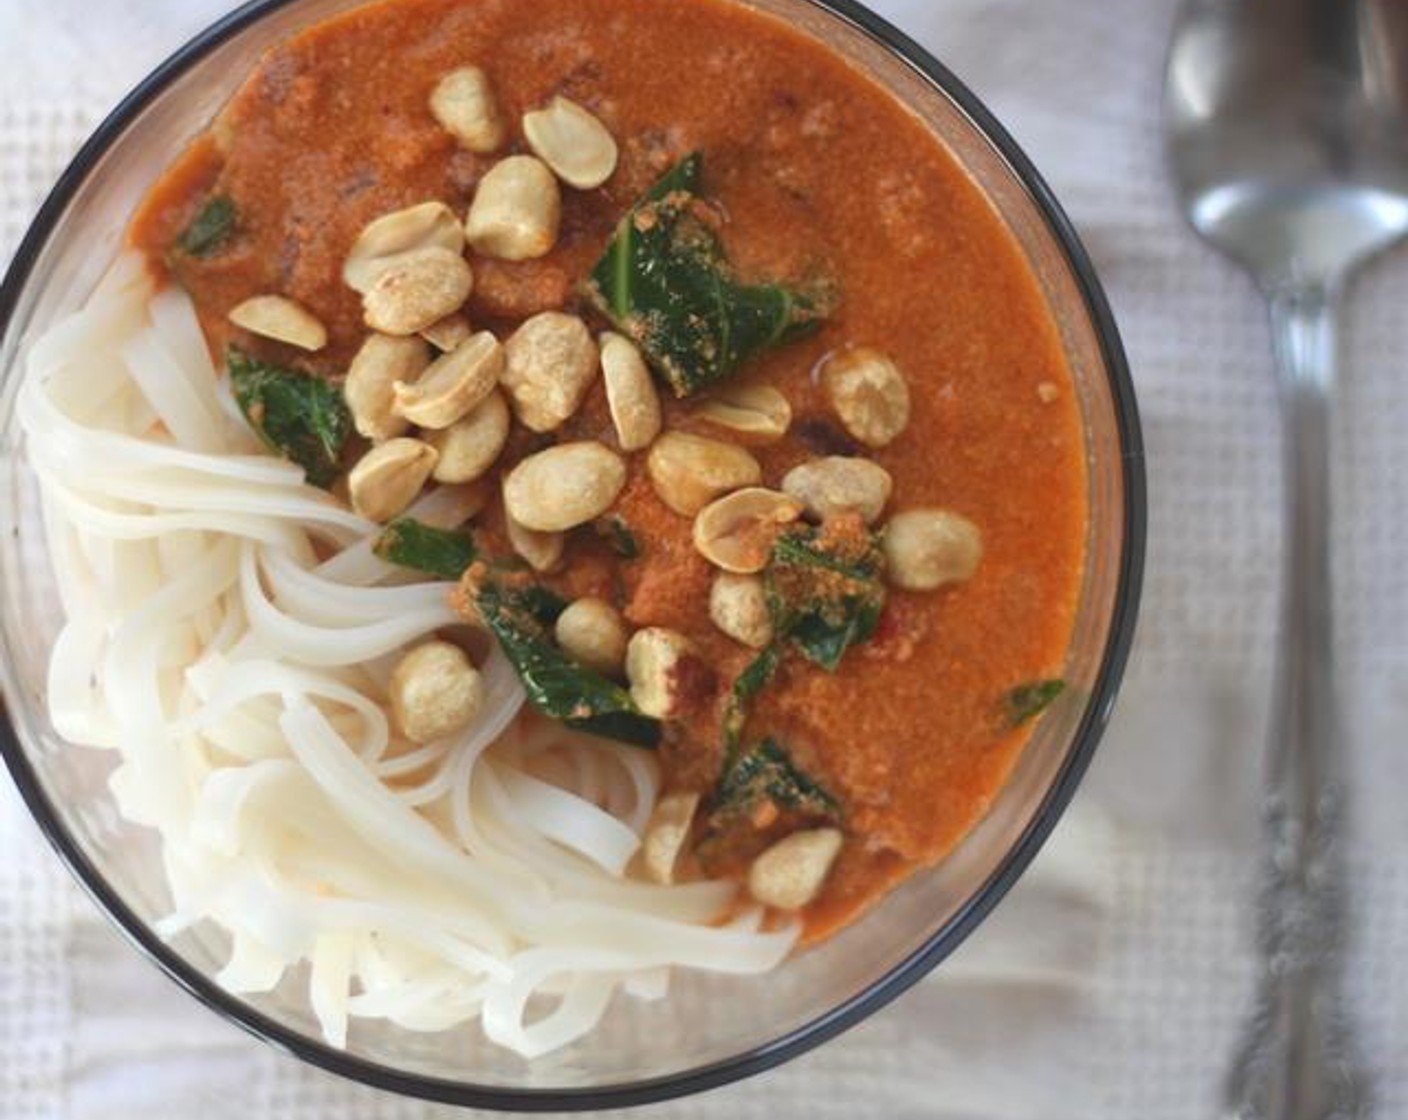 West African "Peanut" Soup with Tahini